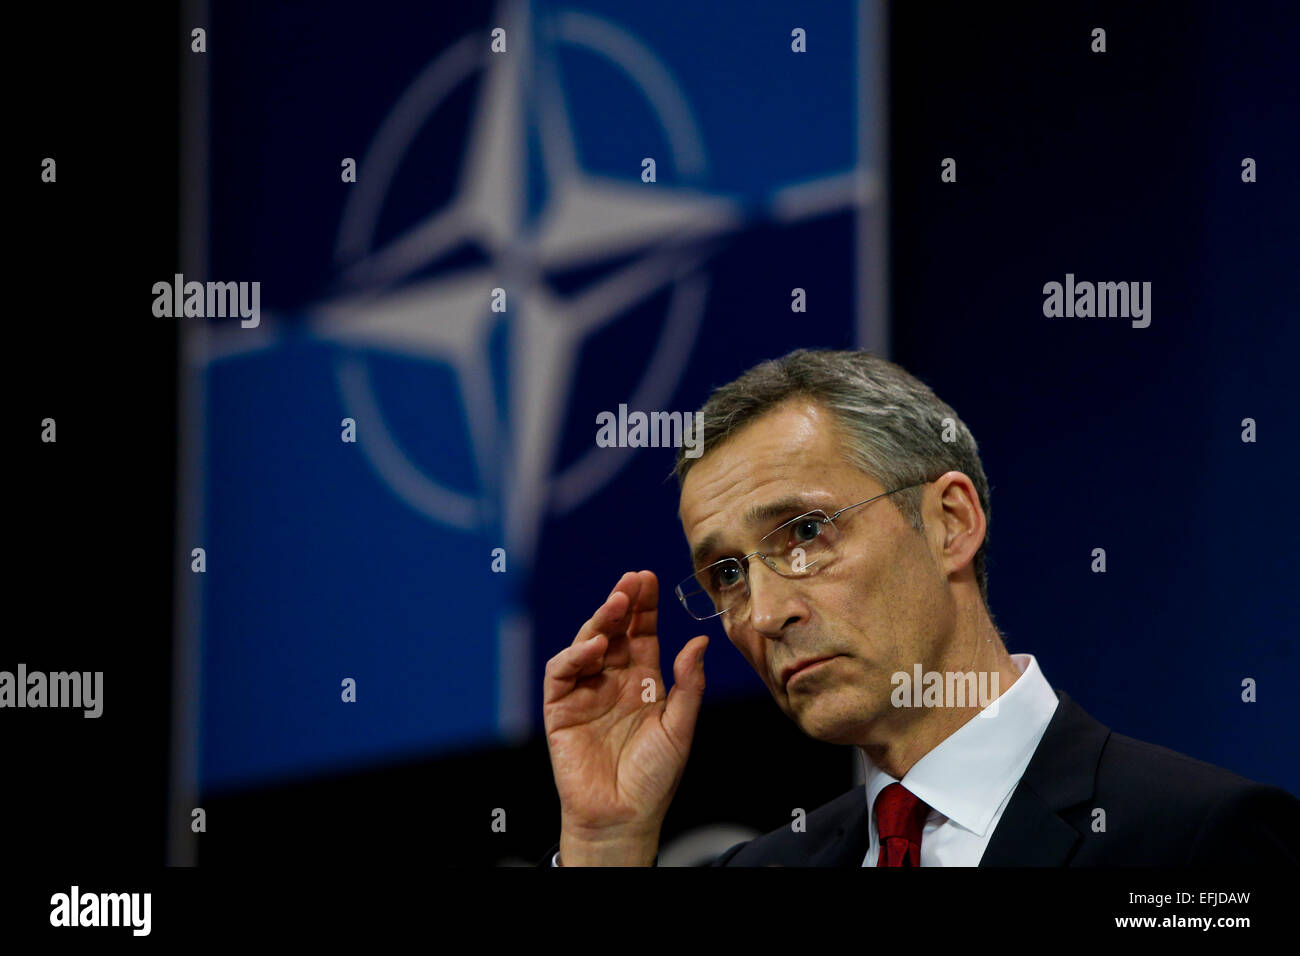 Brussels, Belgium. 5th February, 2015. NATO Secretary General Jens Stoltenberg gestures during the press conference after the NATO defense ministers meeting at the Alliance headquarters in Brussels. NATO Defense Ministers gathered here on Thursday to discuss the implementation of the Readiness Action Plan and the Ukraine crisis. Credit:  Xinhua/Alamy Live News Stock Photo